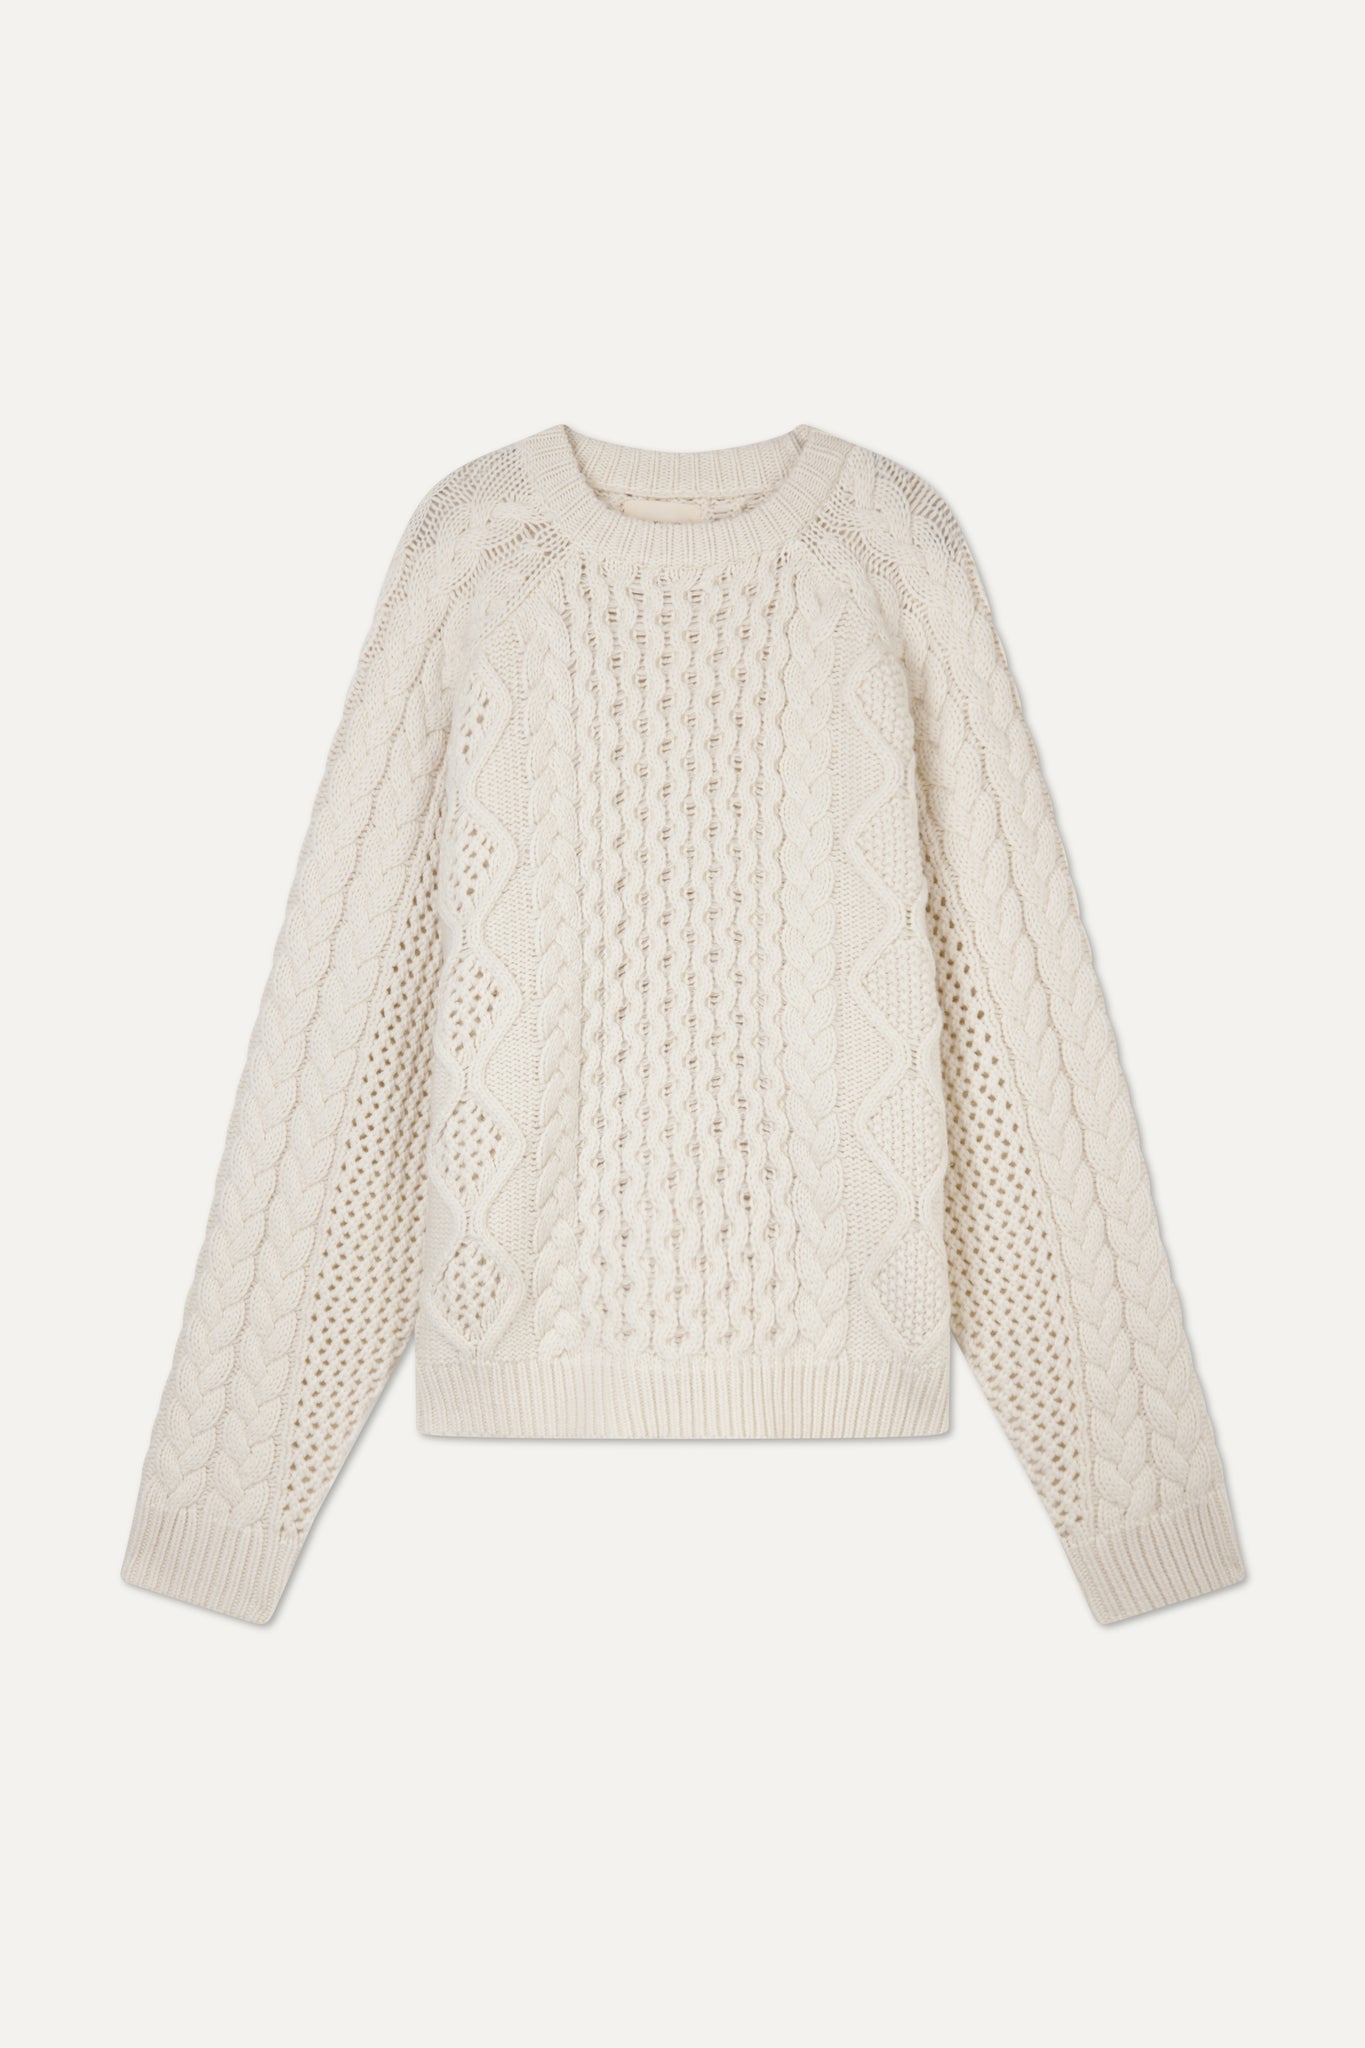 CIPRIANU CABLE KNIT PULLOVER BY LOULOU STUDIO IN CREAM - BEYOND STUDIOS